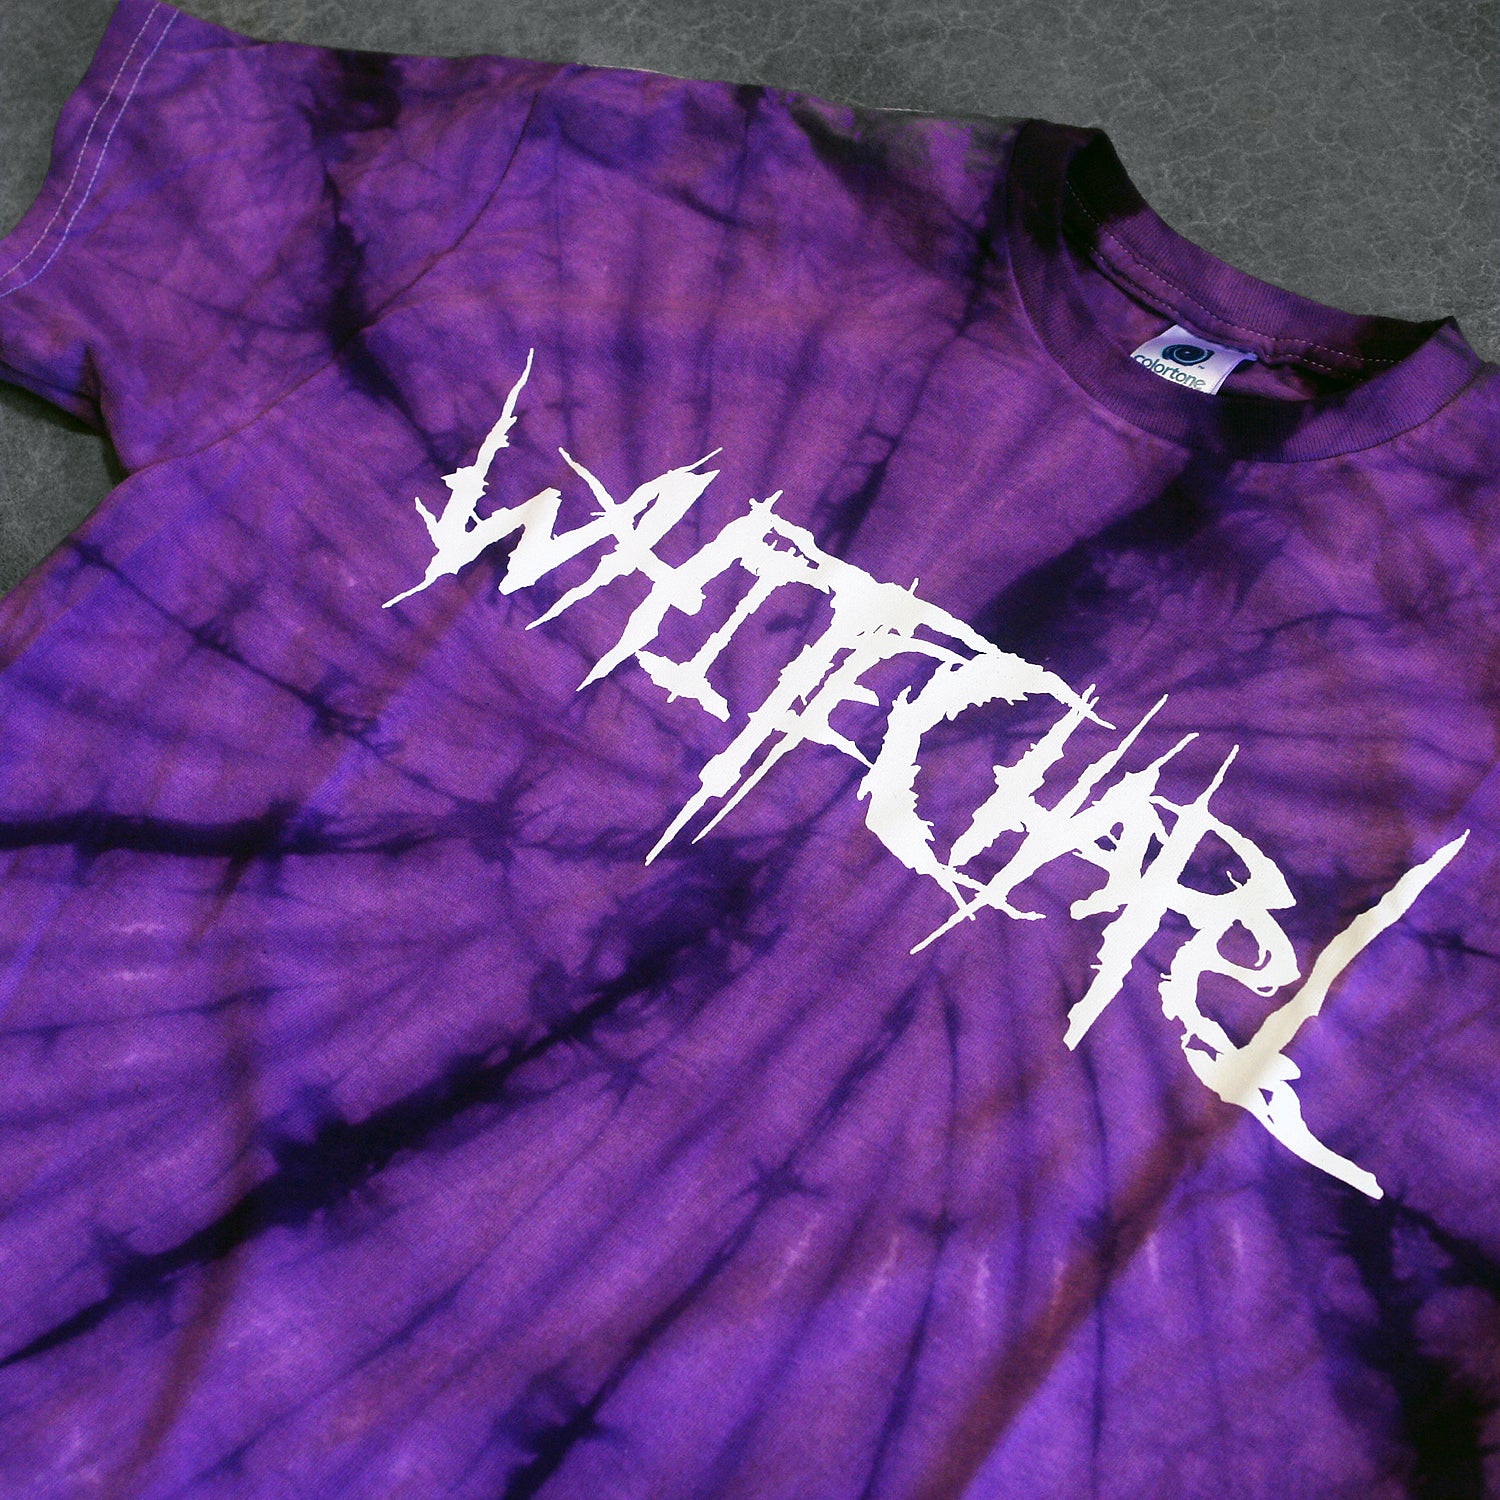 close up, angled image of a purple spider tie dye tee shirt on a cracked concrete background. tee has front center chest print across in white that says Whitechapel